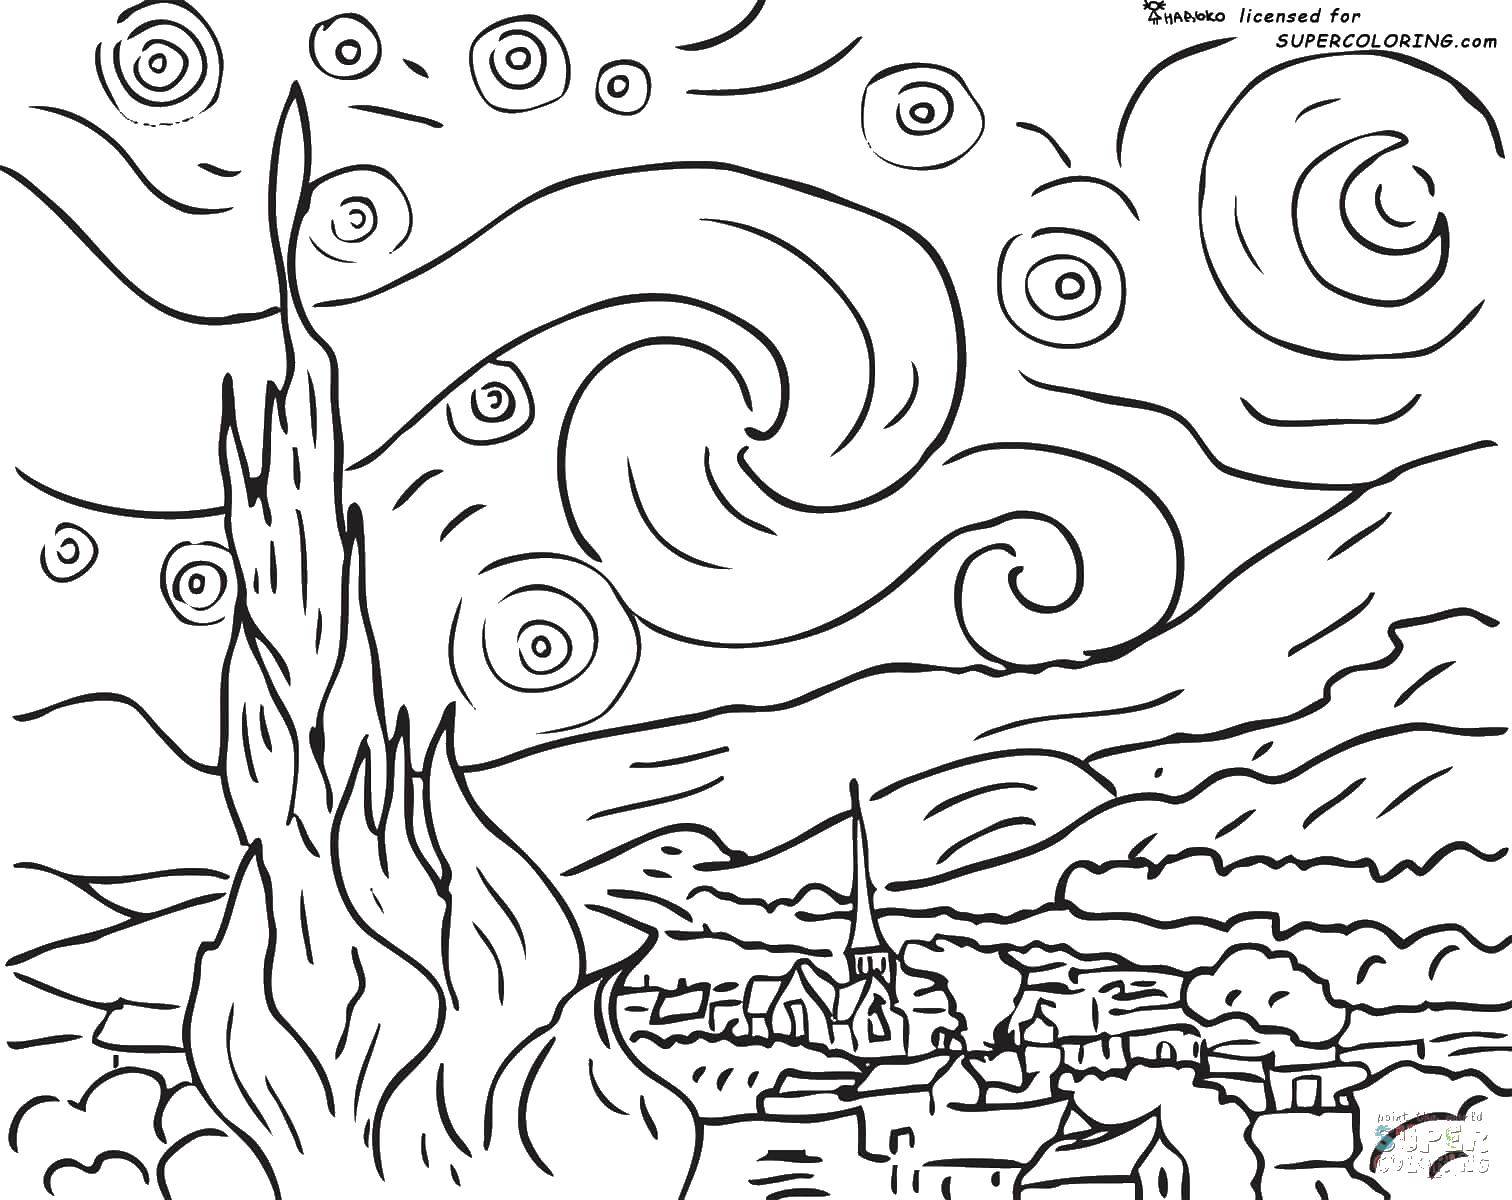 Coloring Van Gogh, starry night. Category coloring. Tags:  Van Gogh, painting, Starry night.